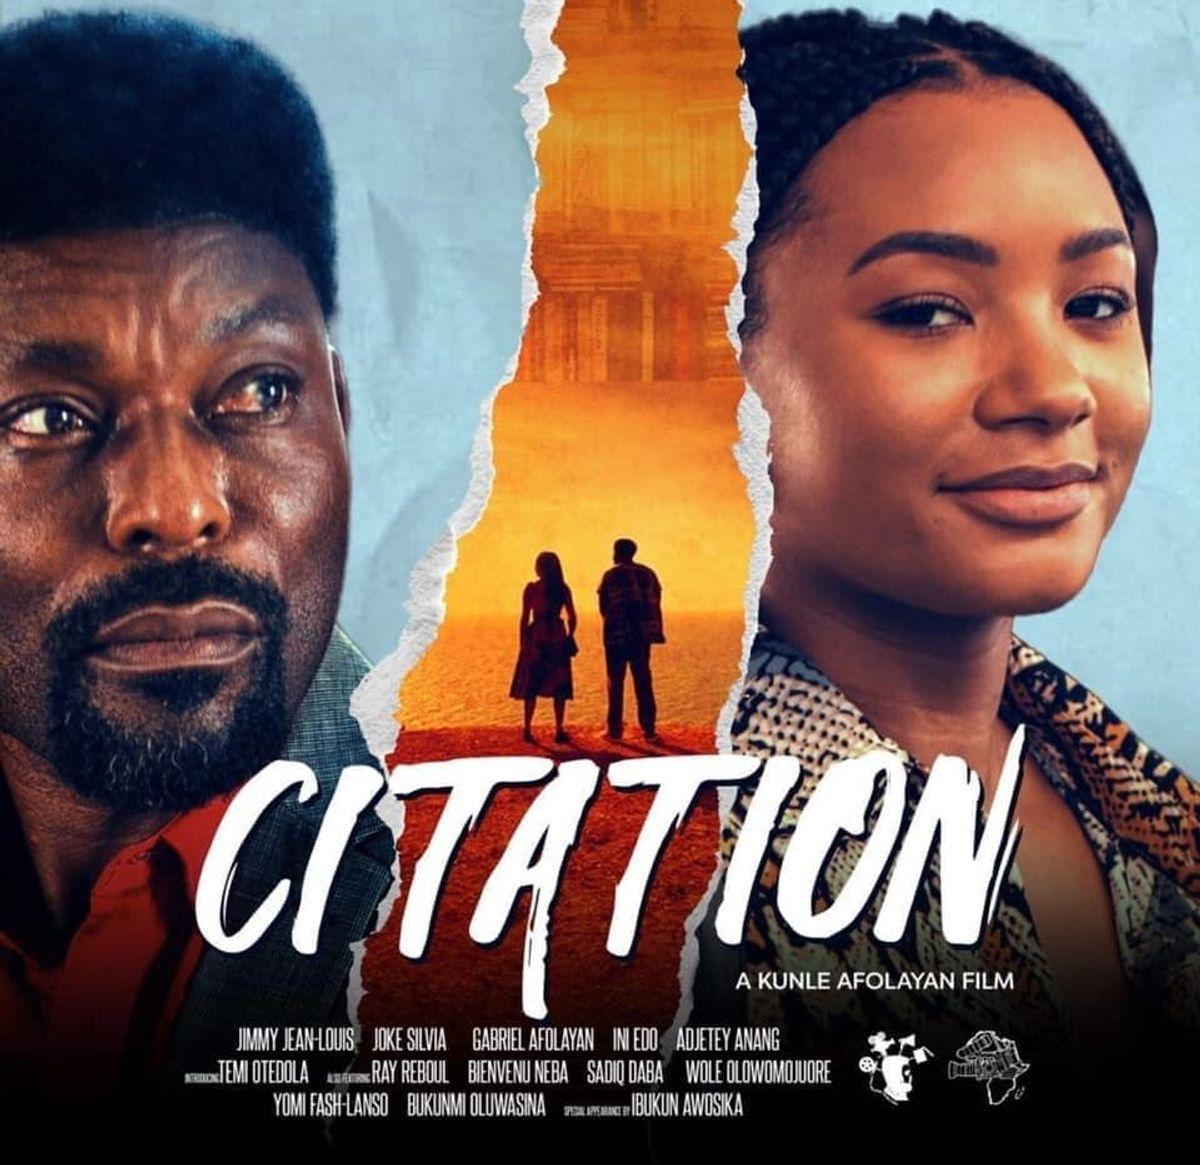 “CITATION” Review: The Overhyped Movie That Failed To Capture The Reality Of Sex For Grades In African Universities